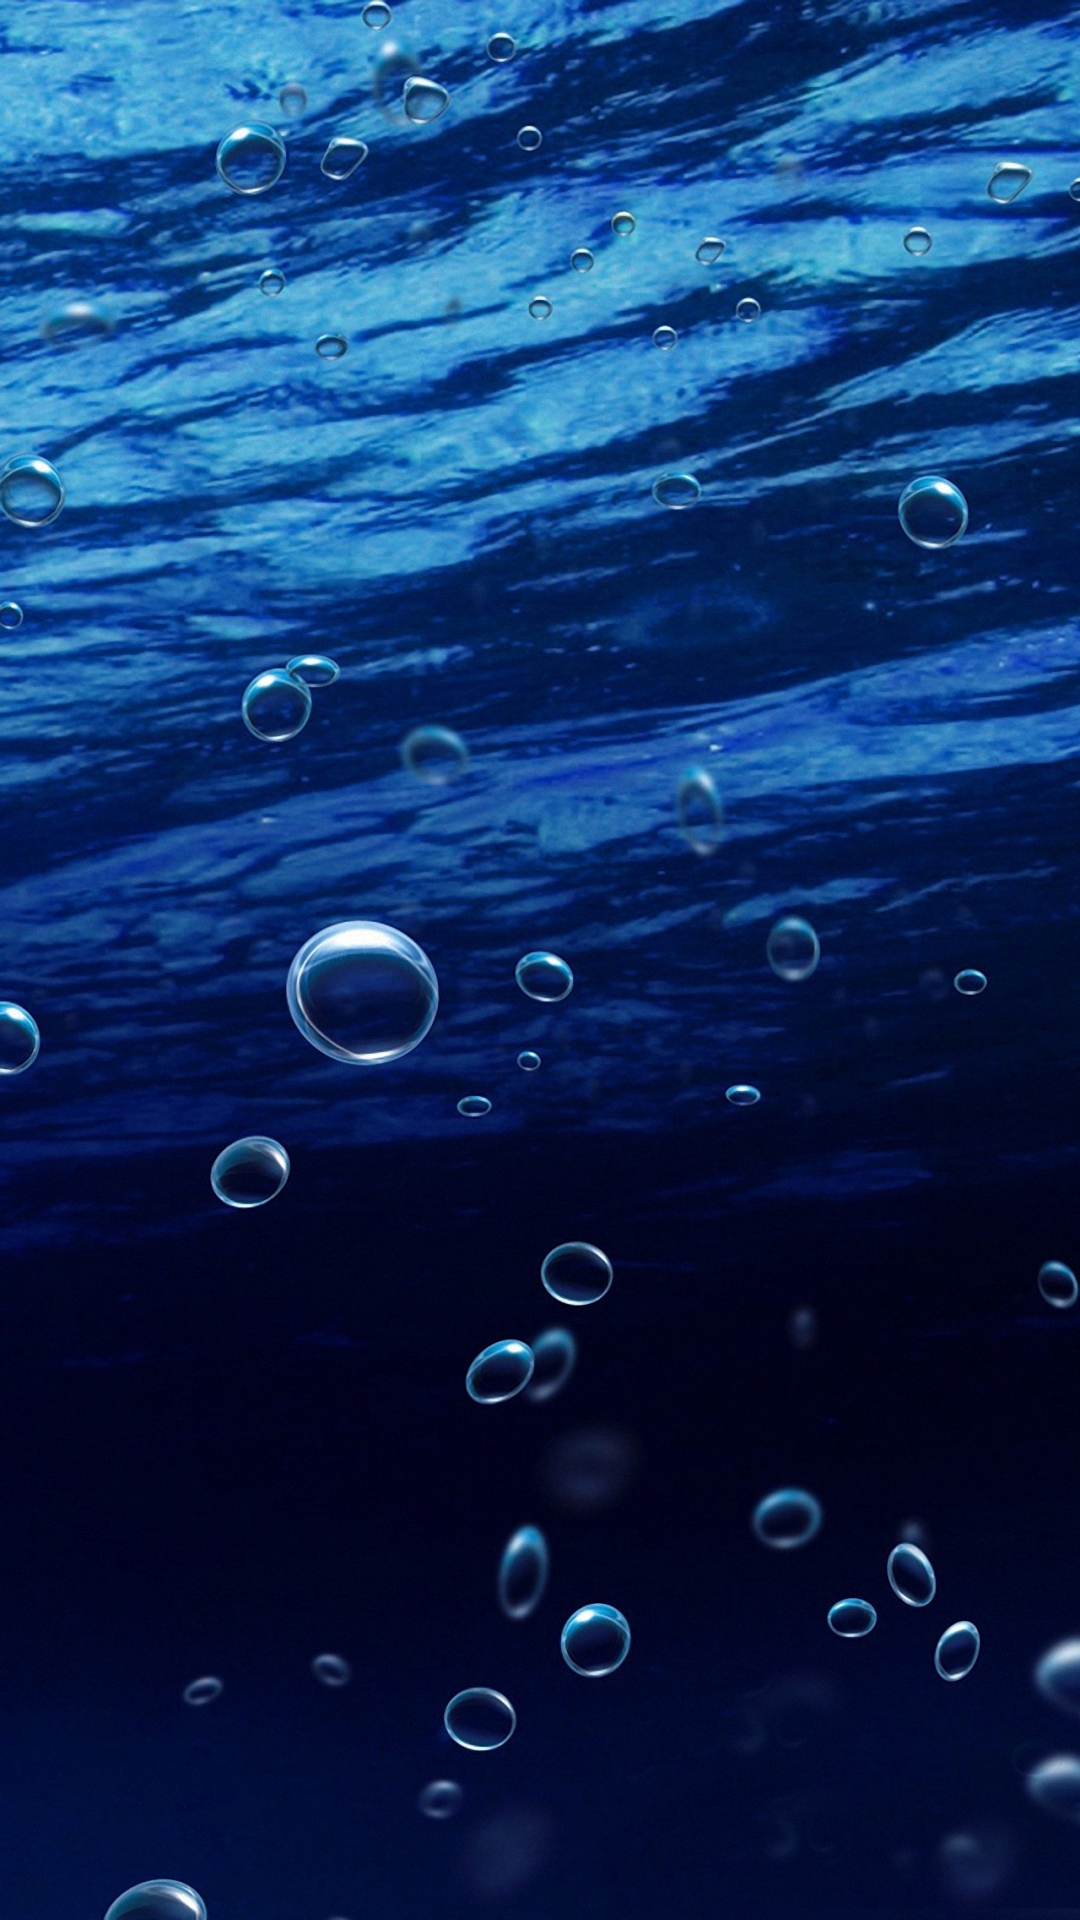 Underwater Bubbles Wallpaper For Samsung Galaxy Note